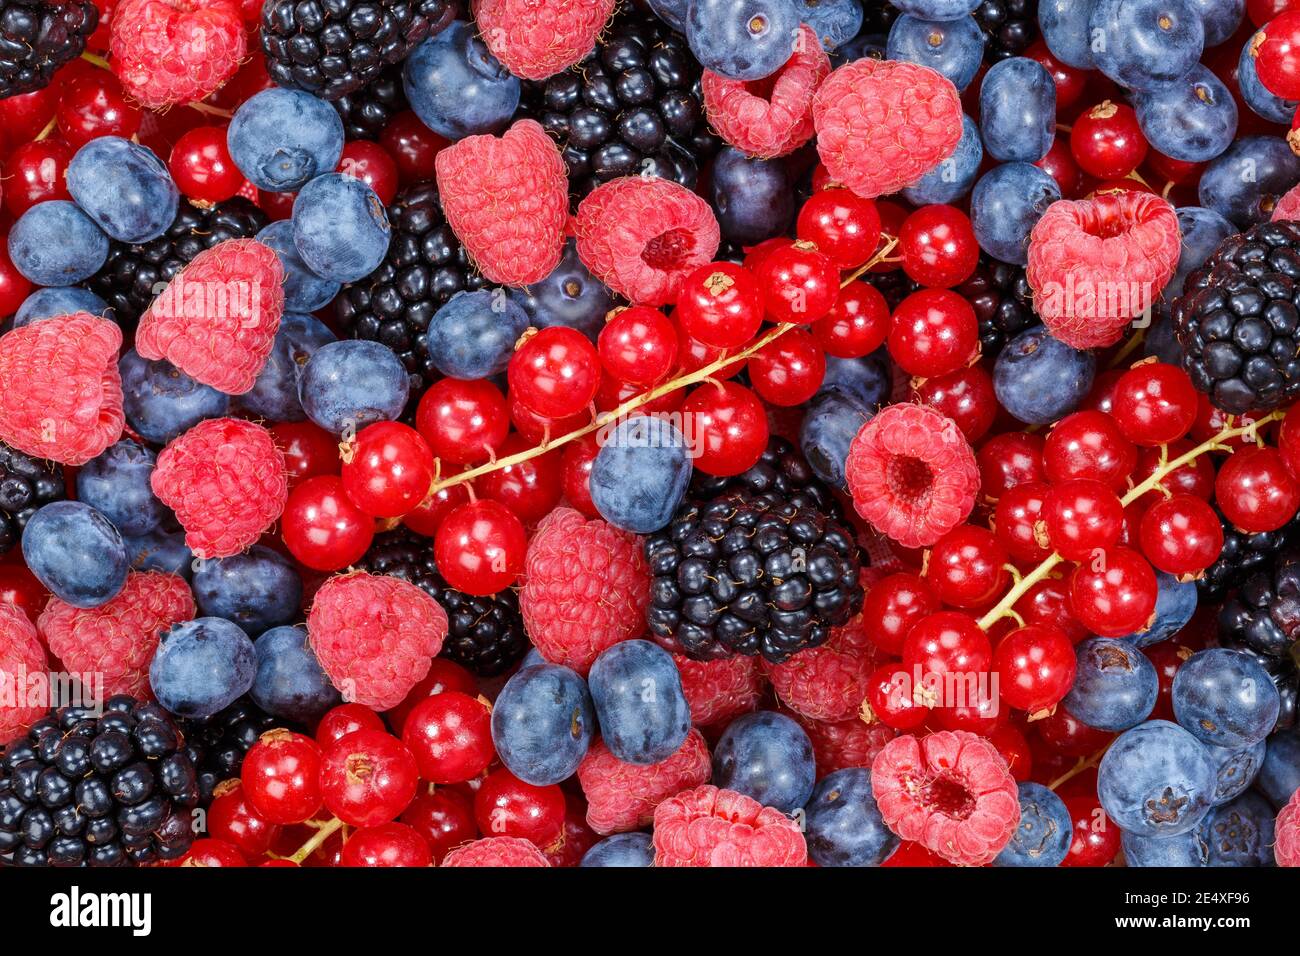 Berries berry fruits collection food background fruit fresh backgrounds Stock Photo